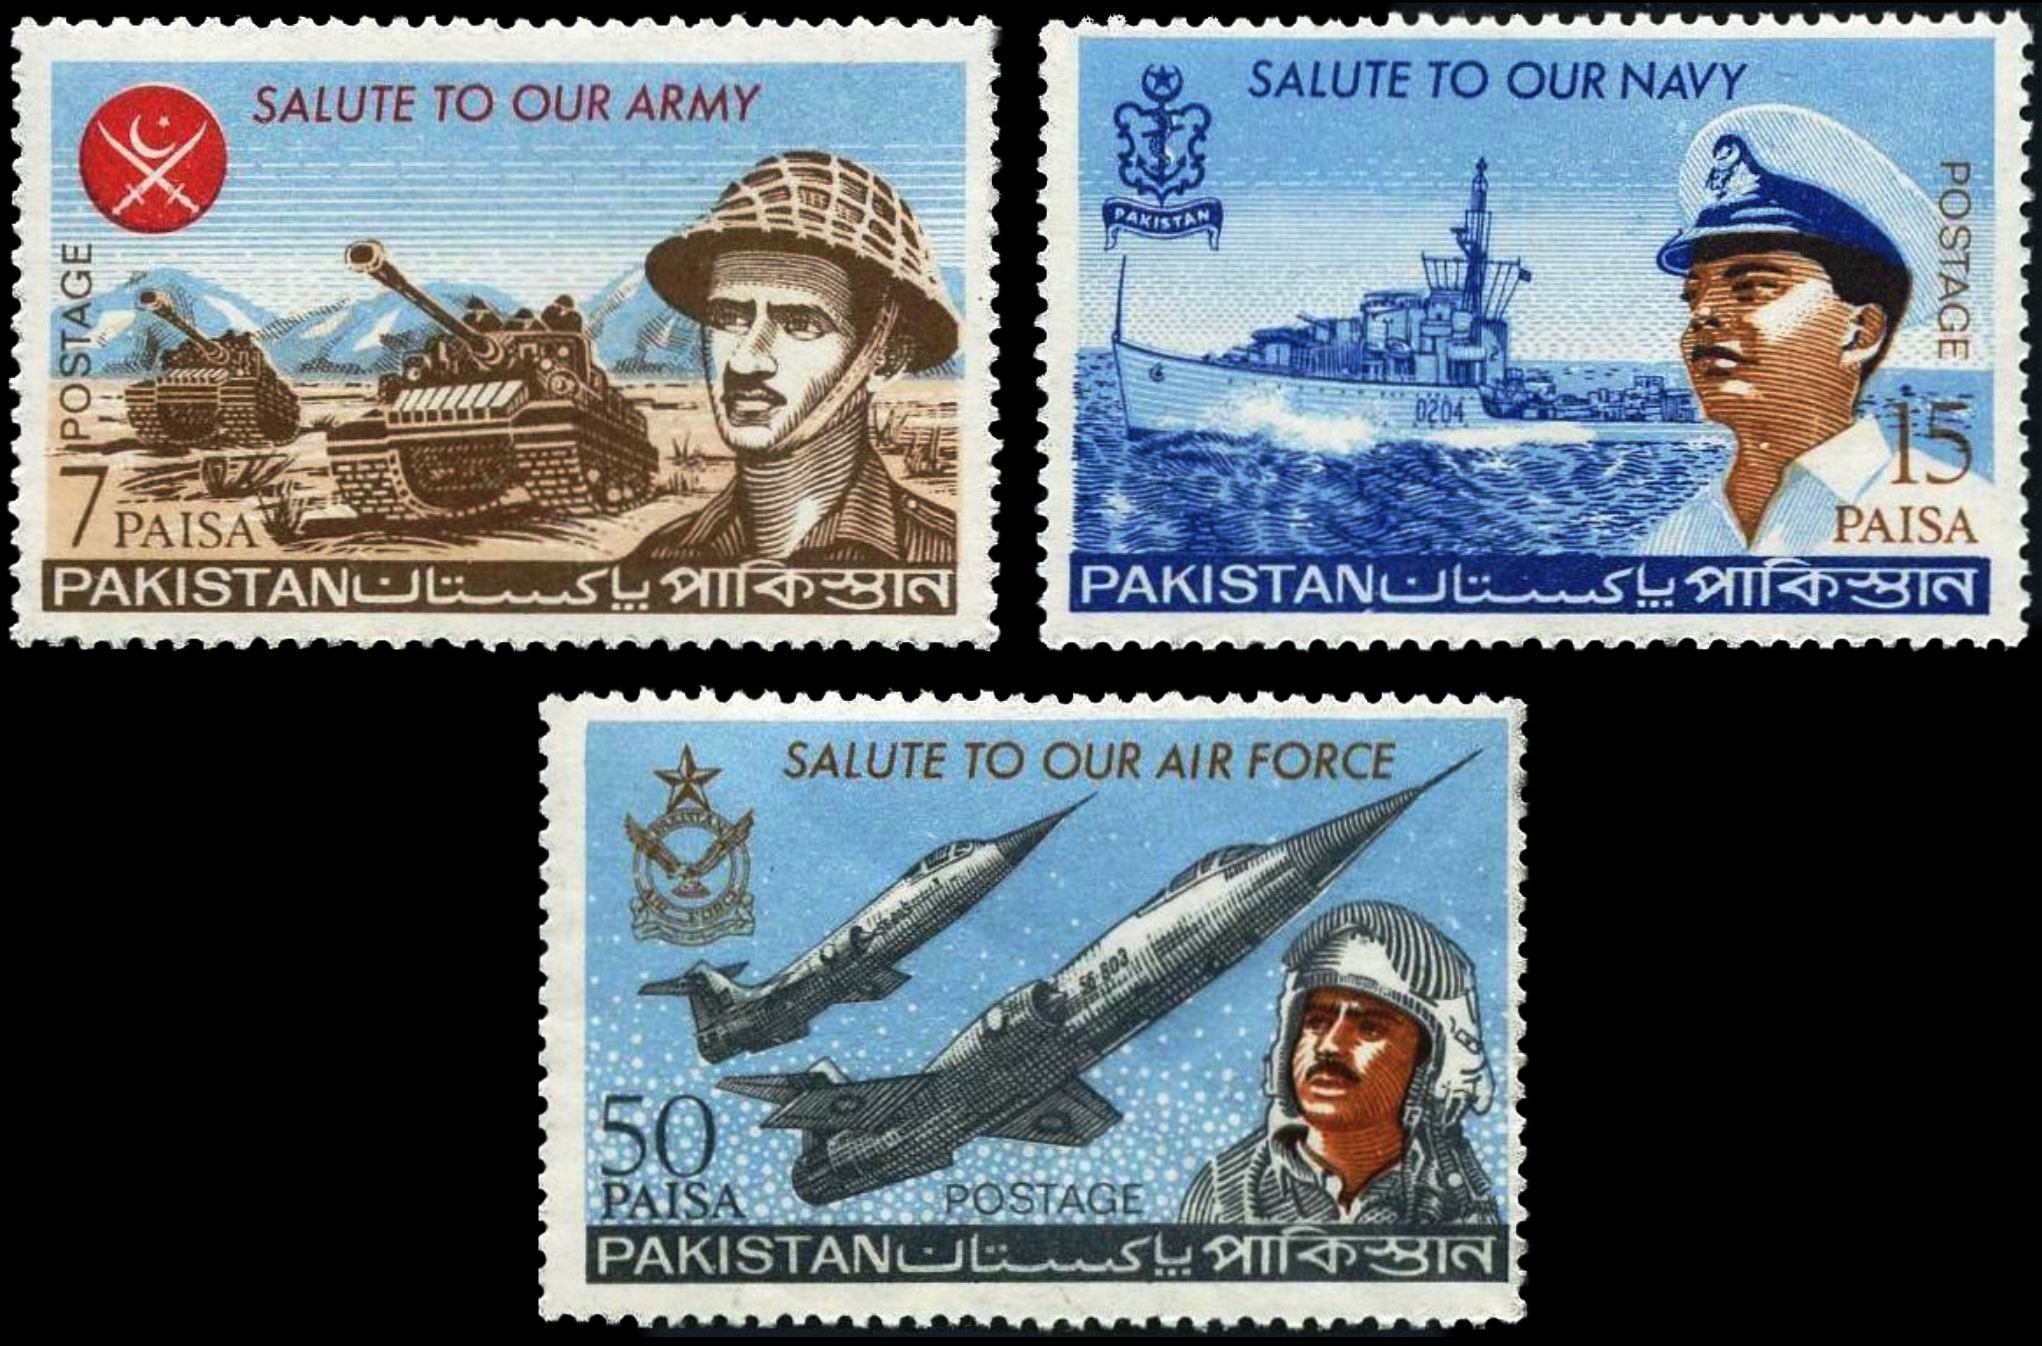 Pakistan Fdc 1965 Brochure & Stamp Armed Forces Day 1965 War - Click Image to Close